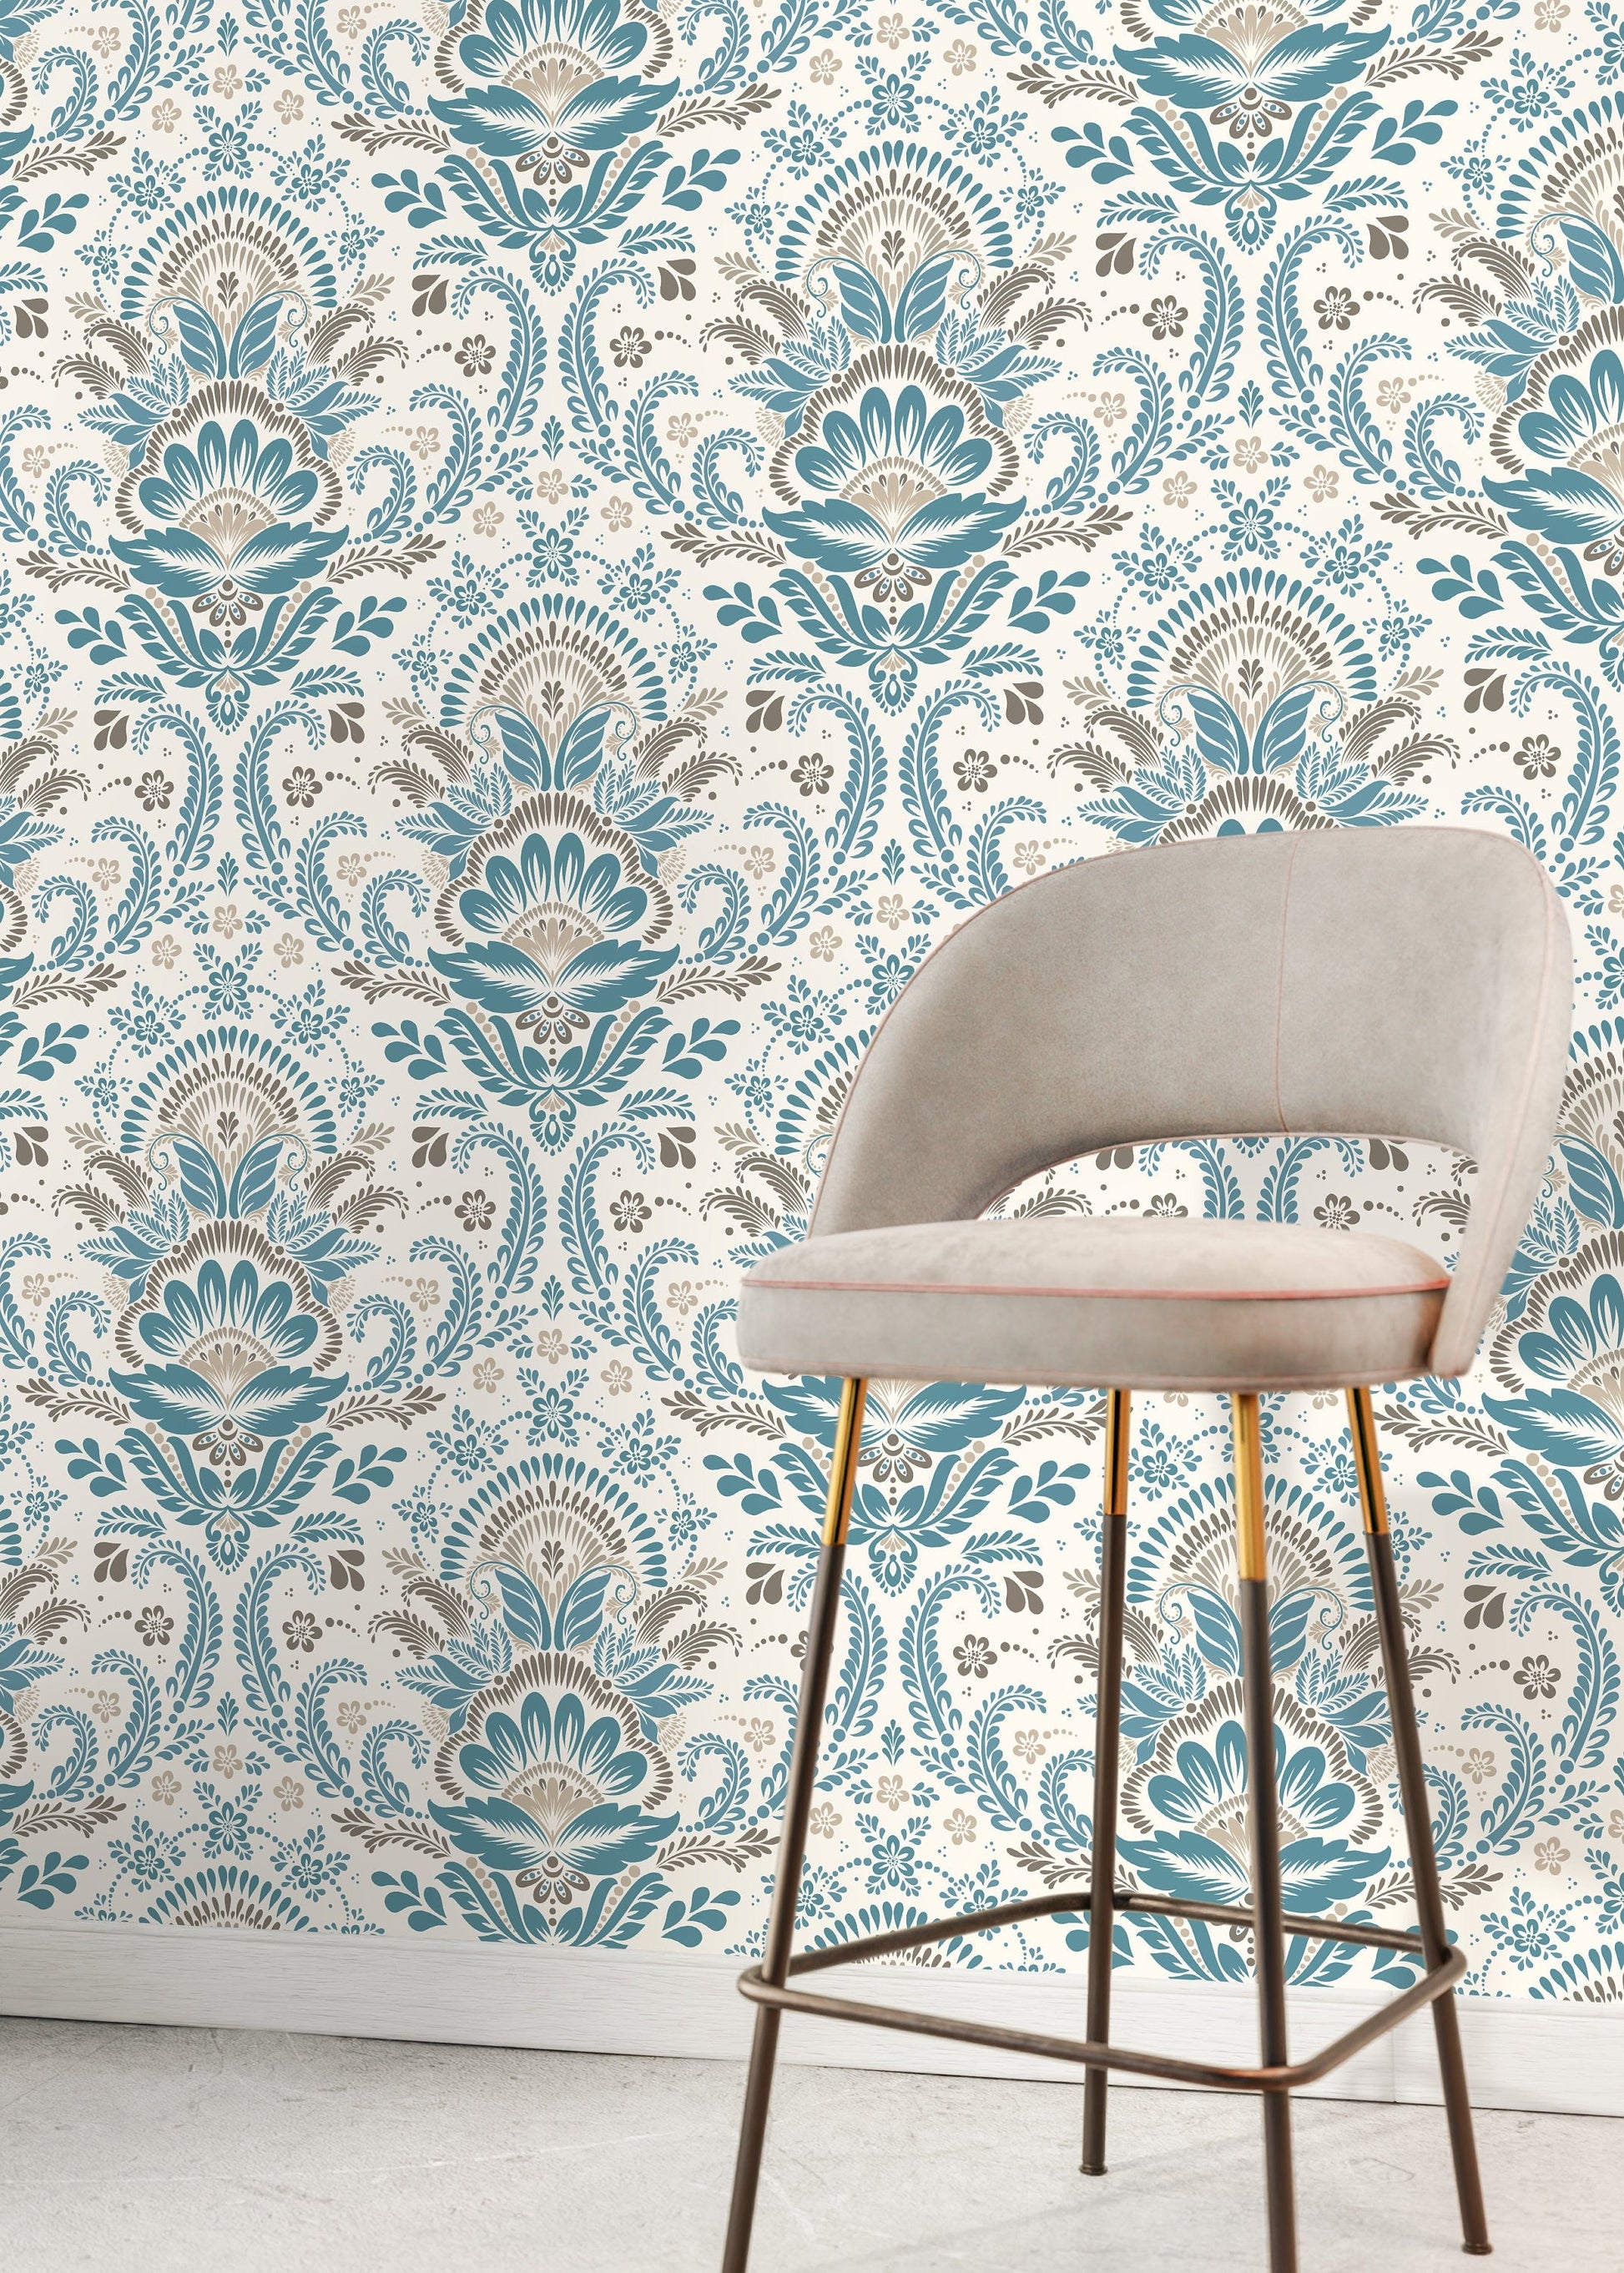 Blue and Beige Damask Wallpaper / Peel and Stick Wallpaper Removable Wallpaper Home Decor Wall Art Wall Decor Room Decor - D186